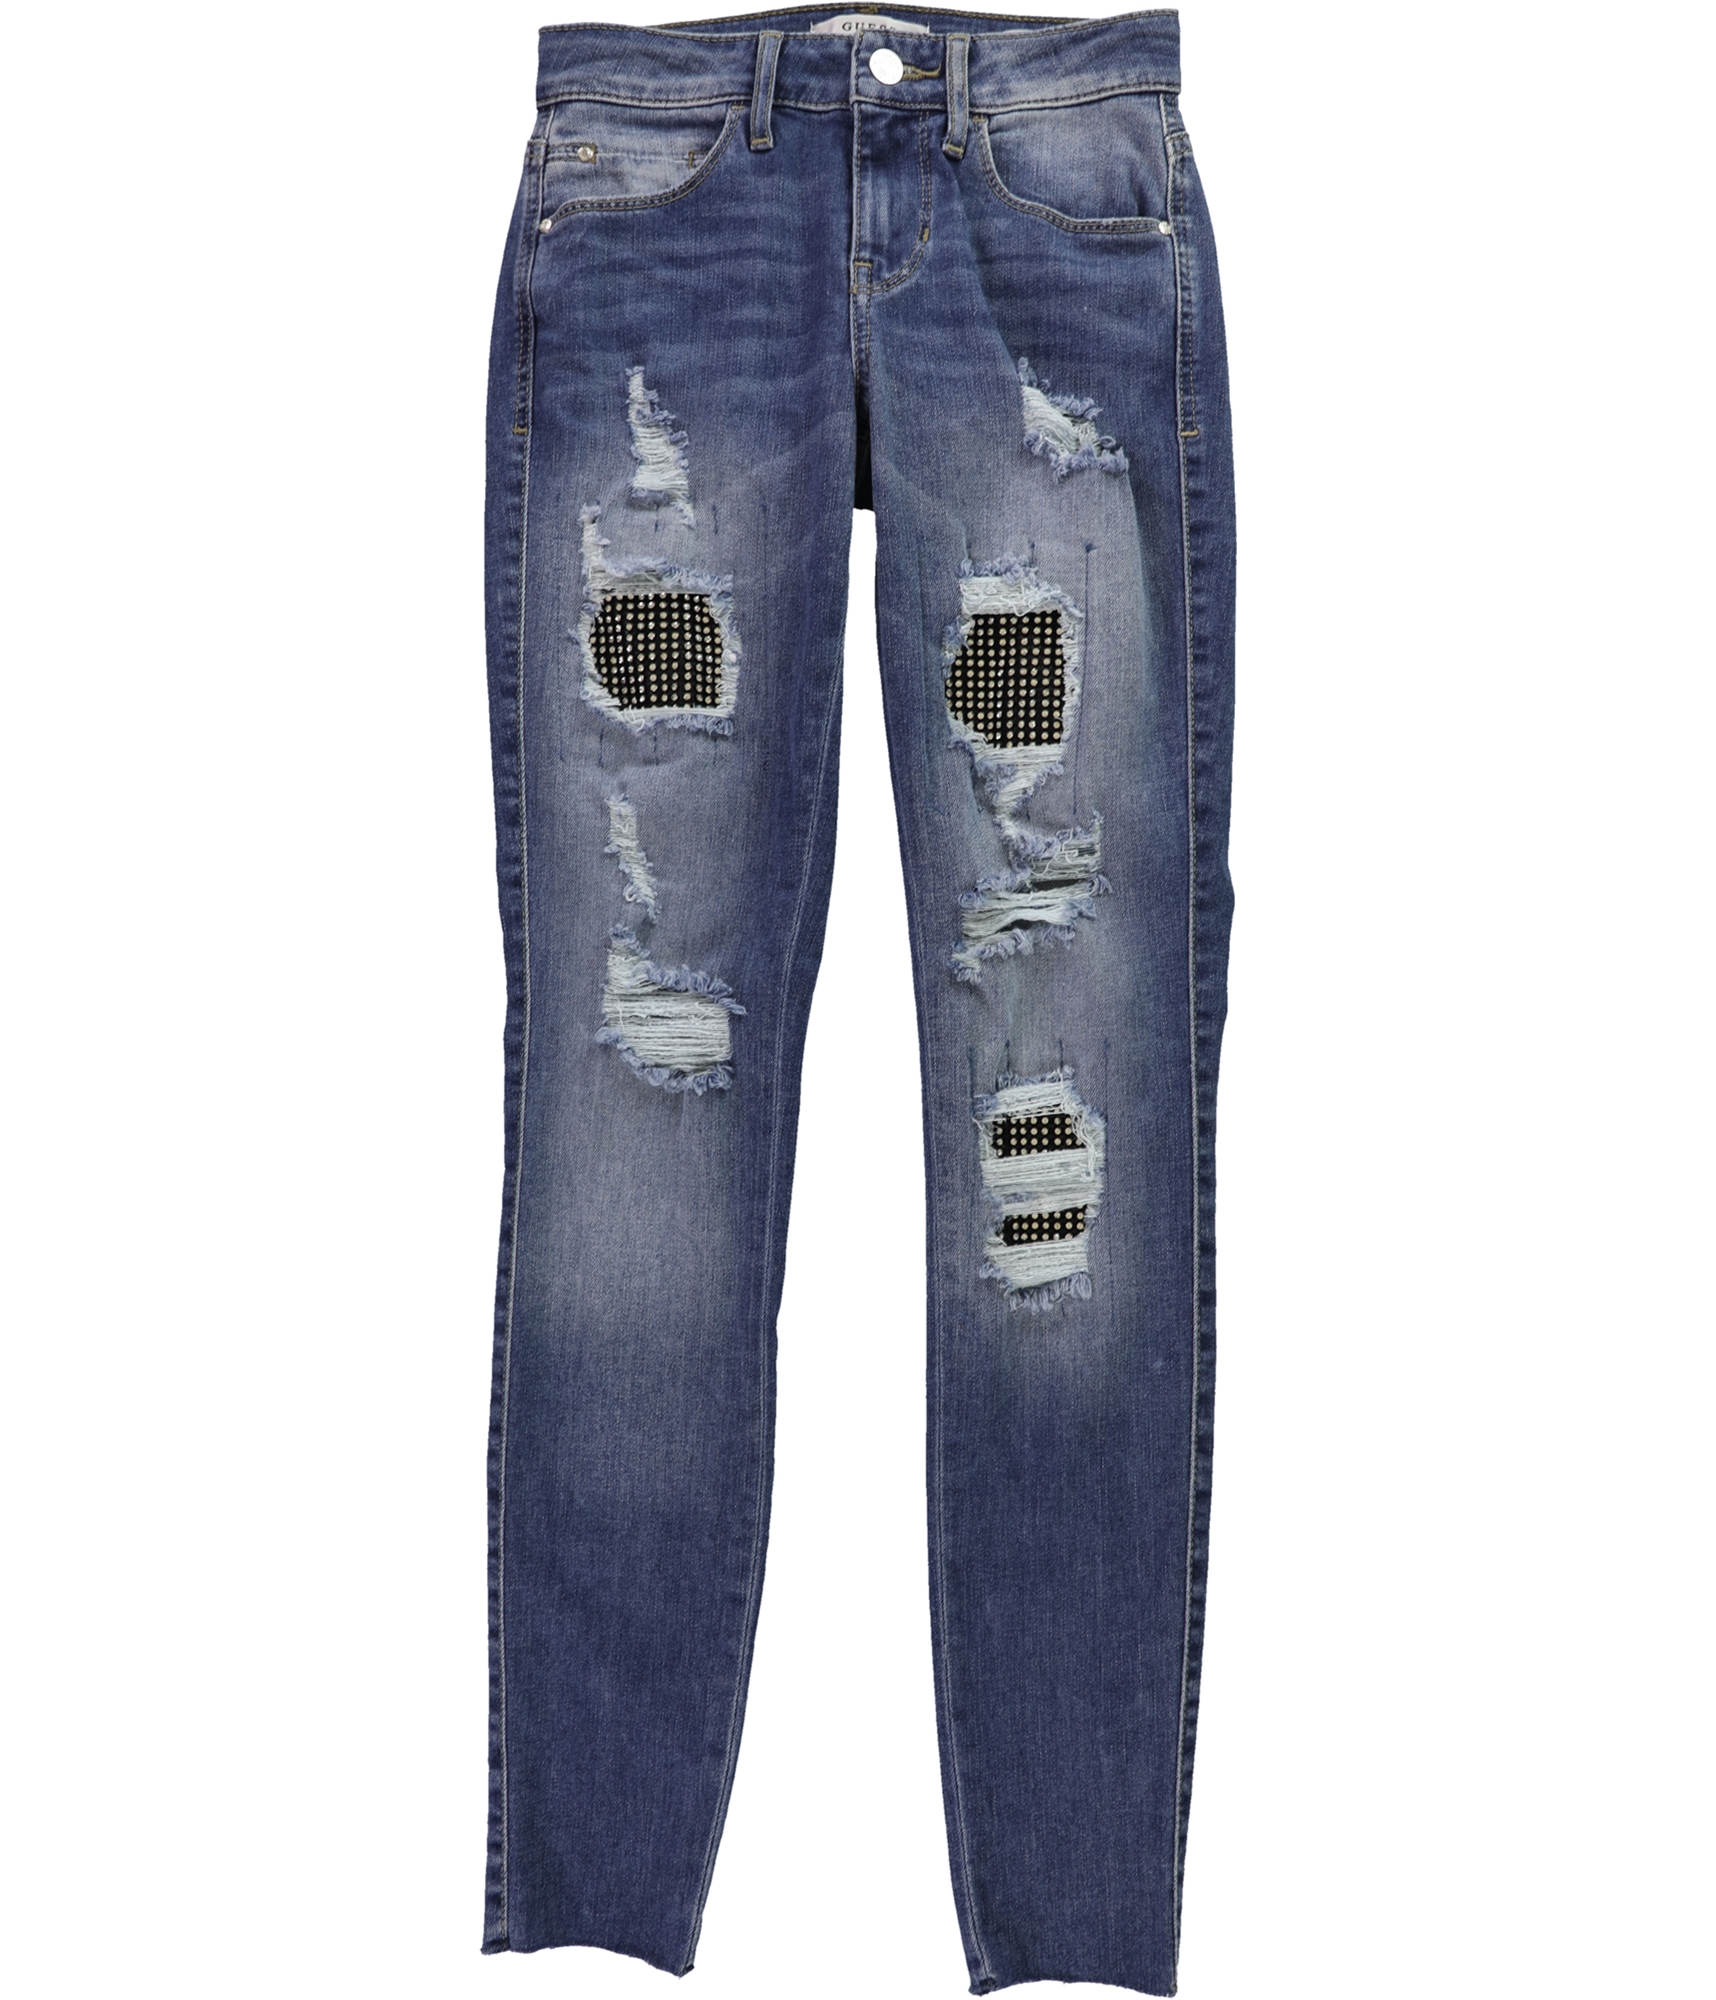 Guess Womens Ripped Embellished Skinny Fit Jeans Blue 26 192541015138 Ebay